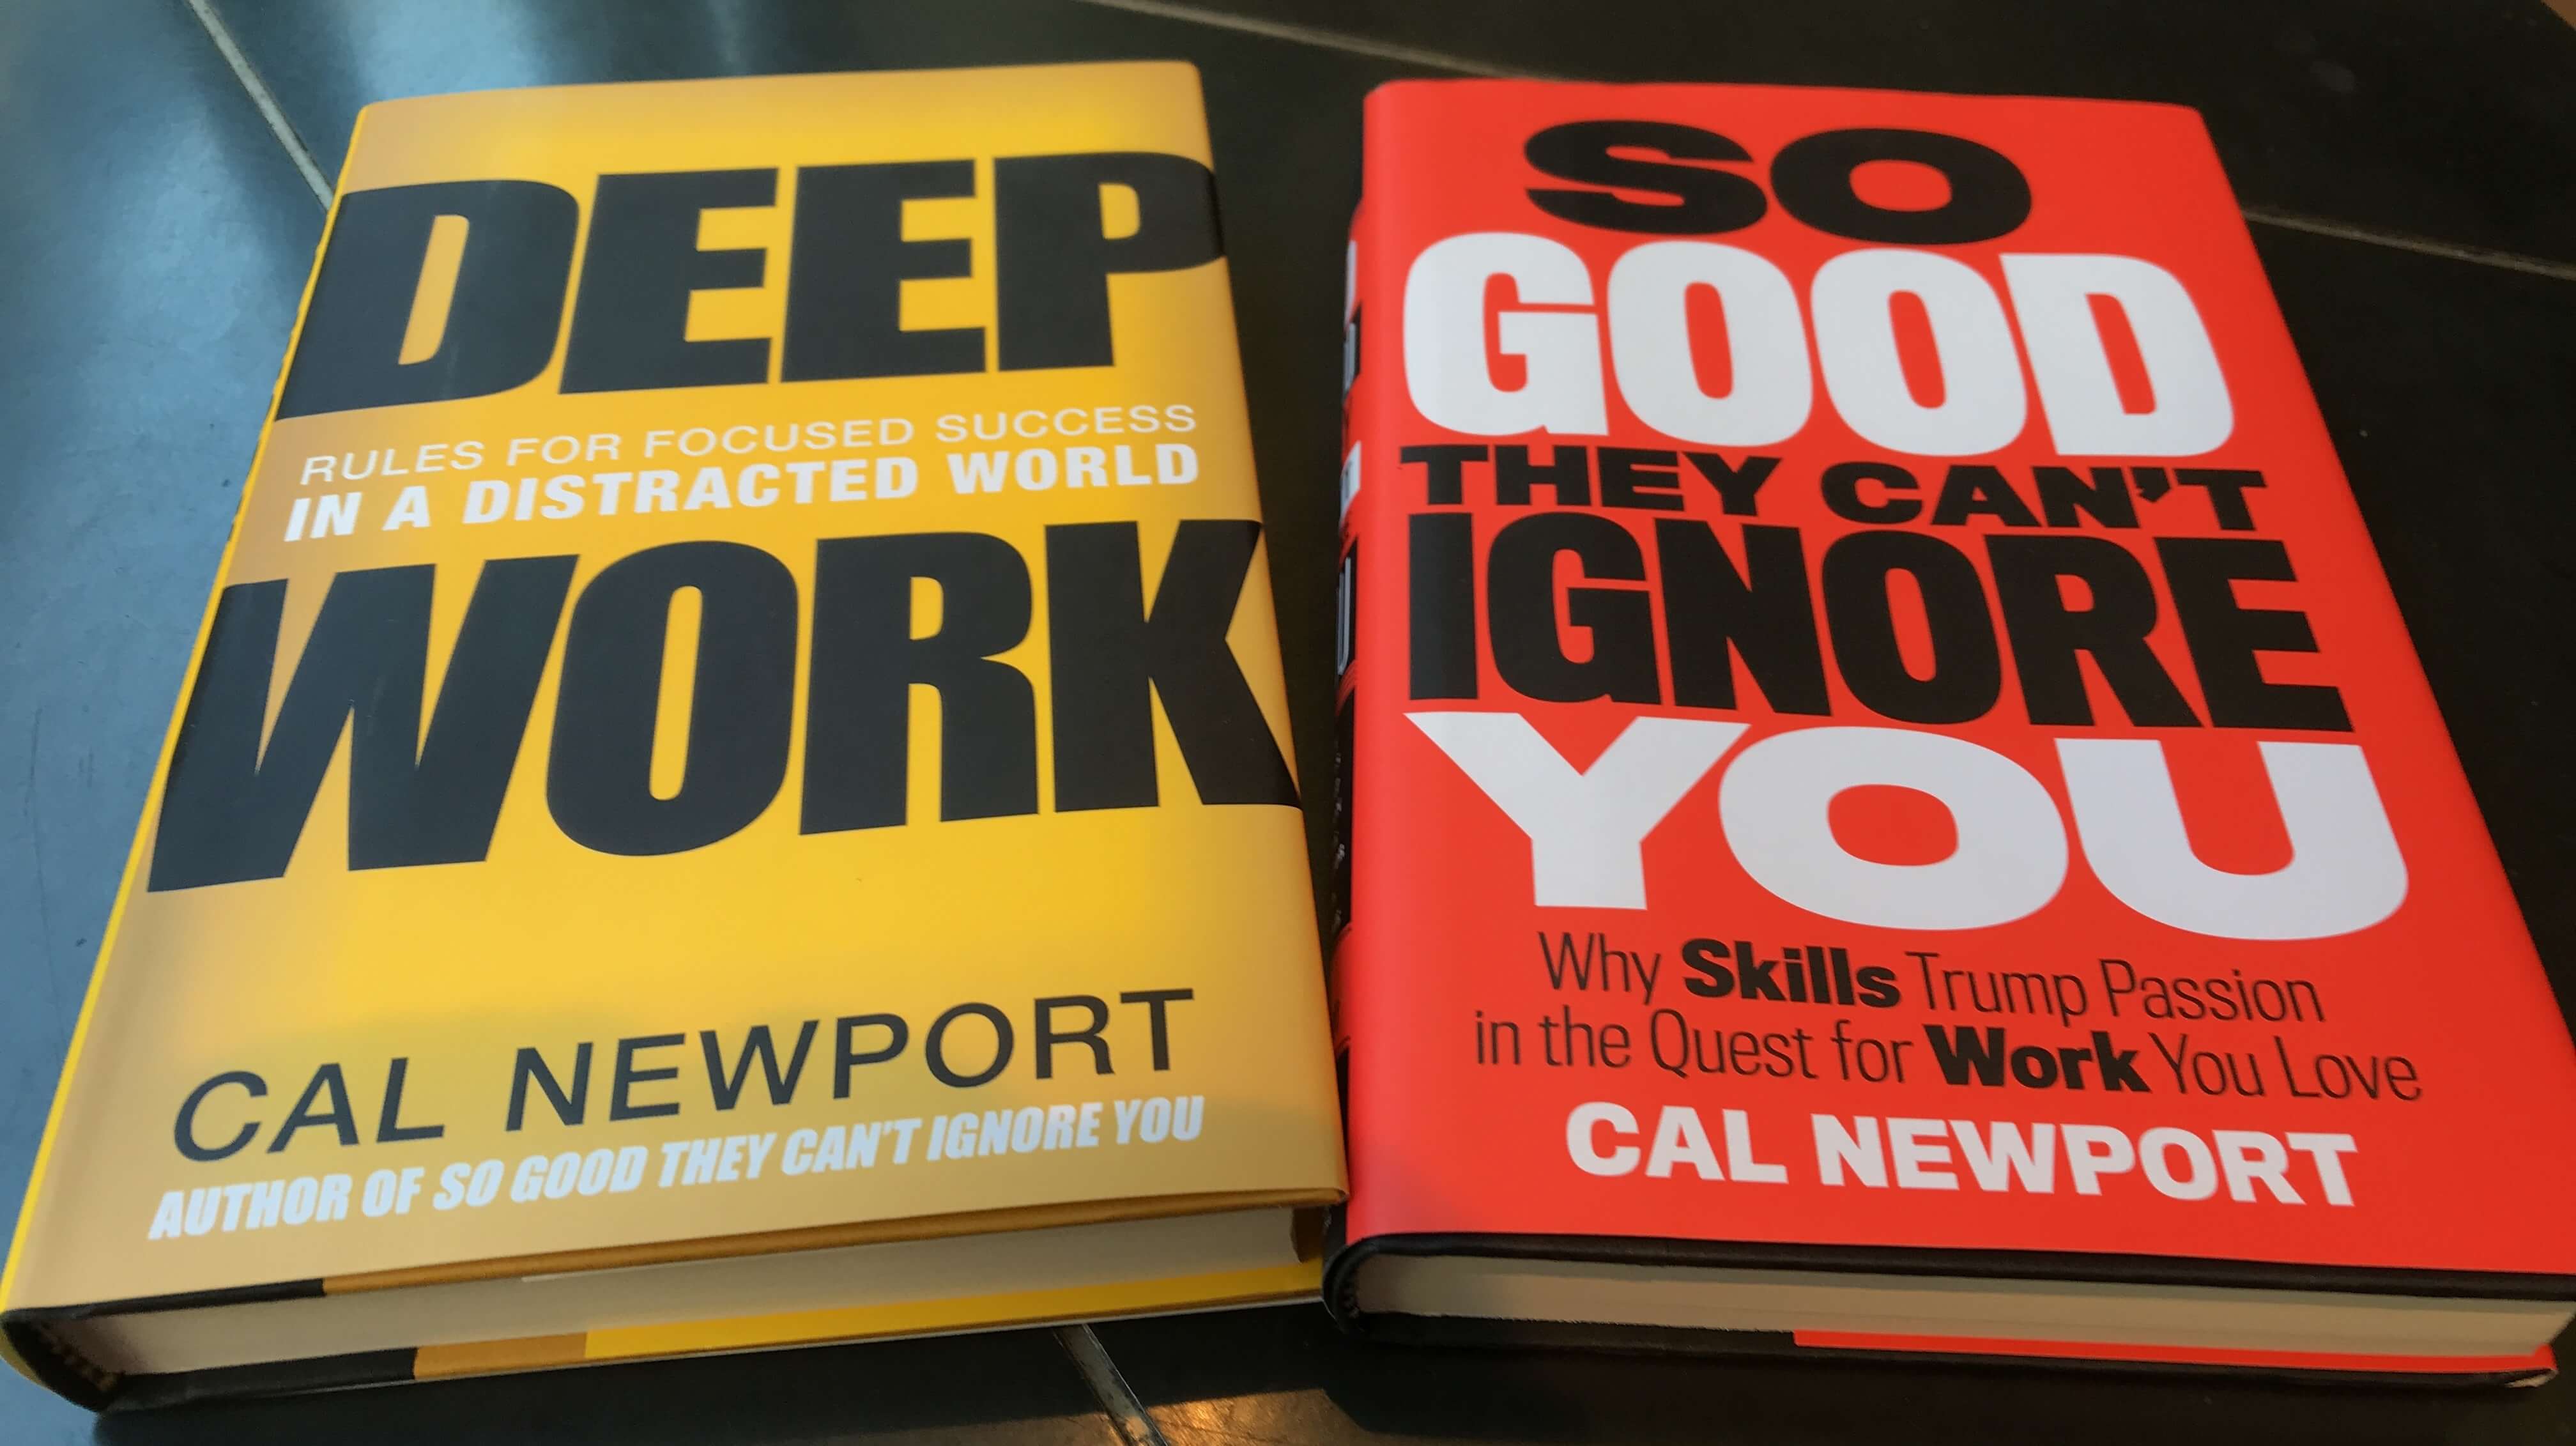 Two of my preferred nonfiction books, by Cal Newport <a href='https://www.goodreads.com/author/show/147891.Cal_Newport'>(Goodreads)</a>